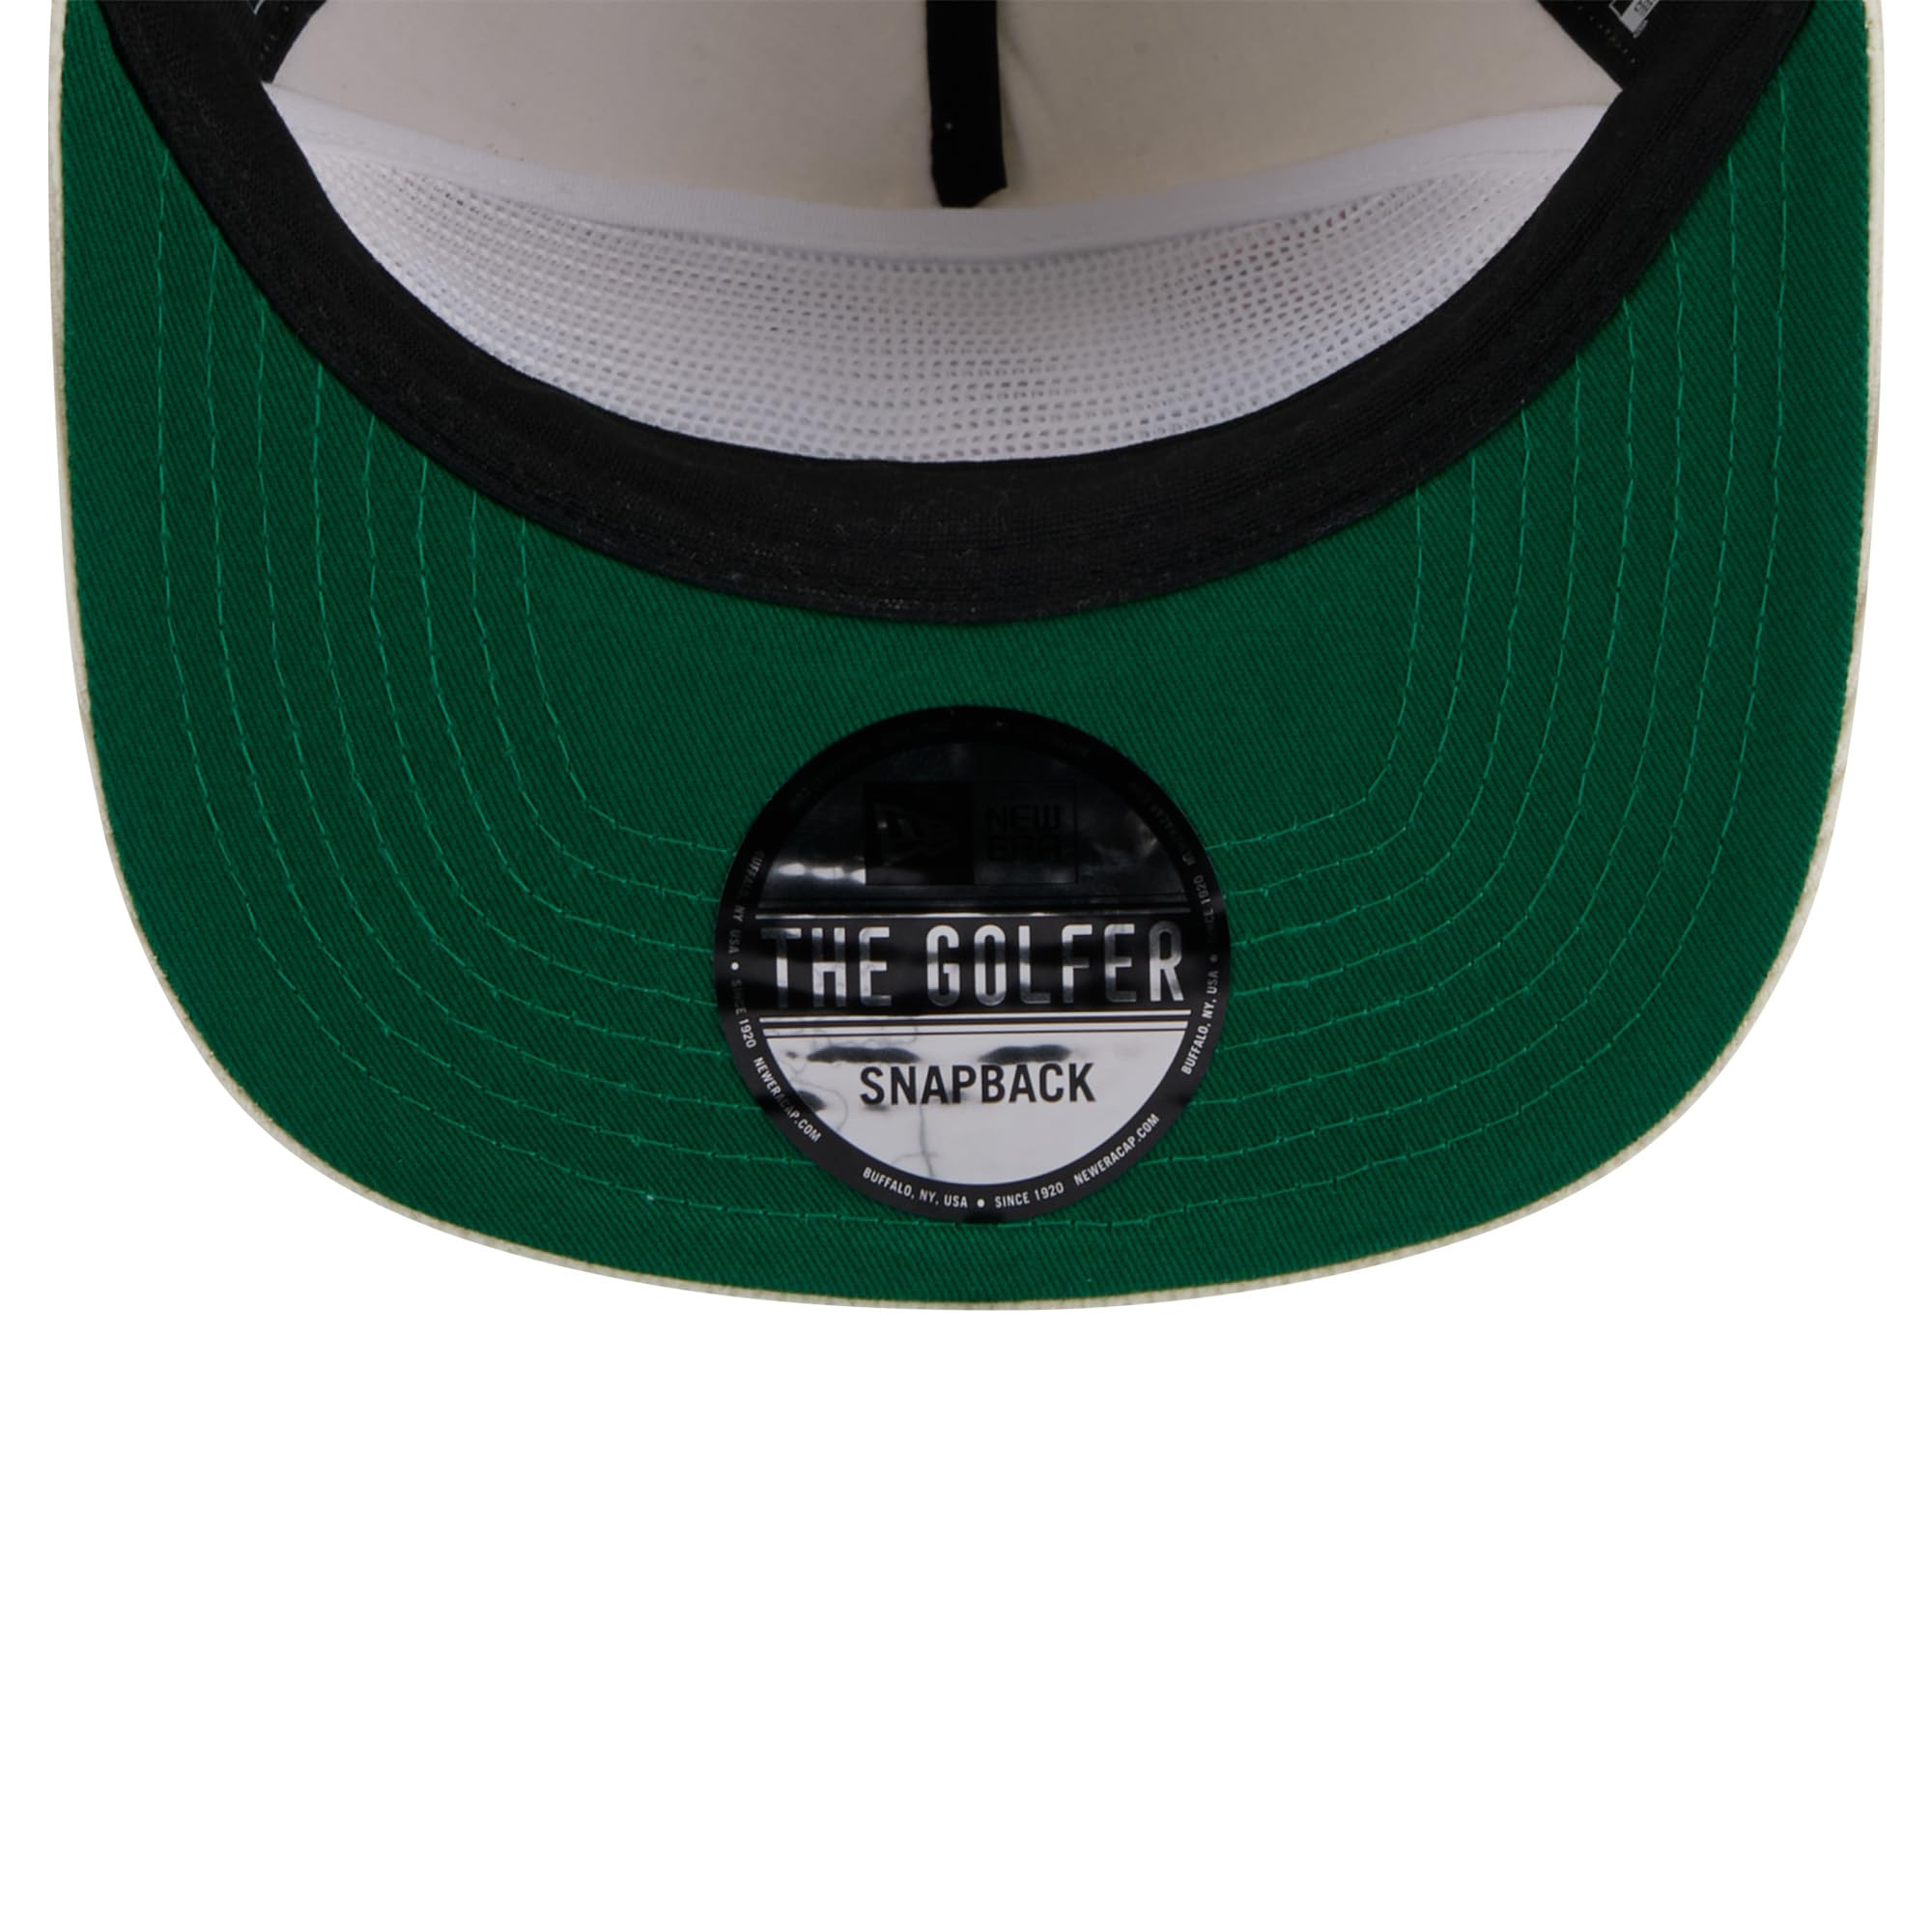 New Era Men's Cream Miami Dolphins Throwback Corduroy Golfer Snapback Hat - Caps Fitted Caps Fitted New Era